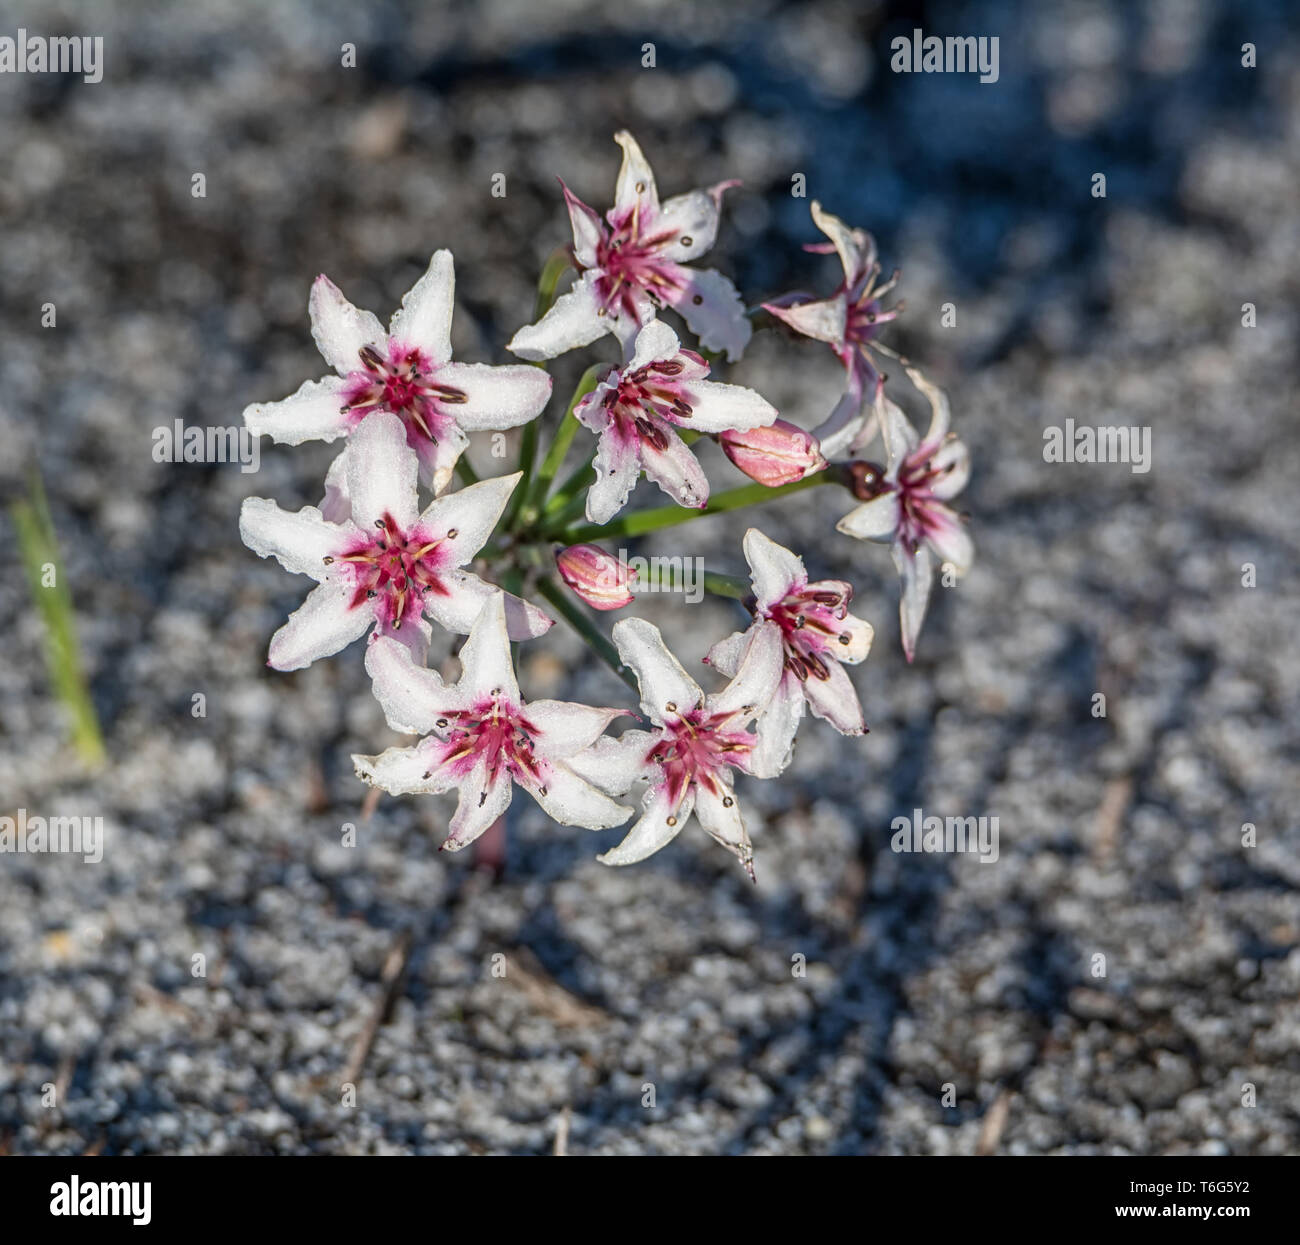 A Hessea cinnamomea flower in Southern Africa Stock Photo